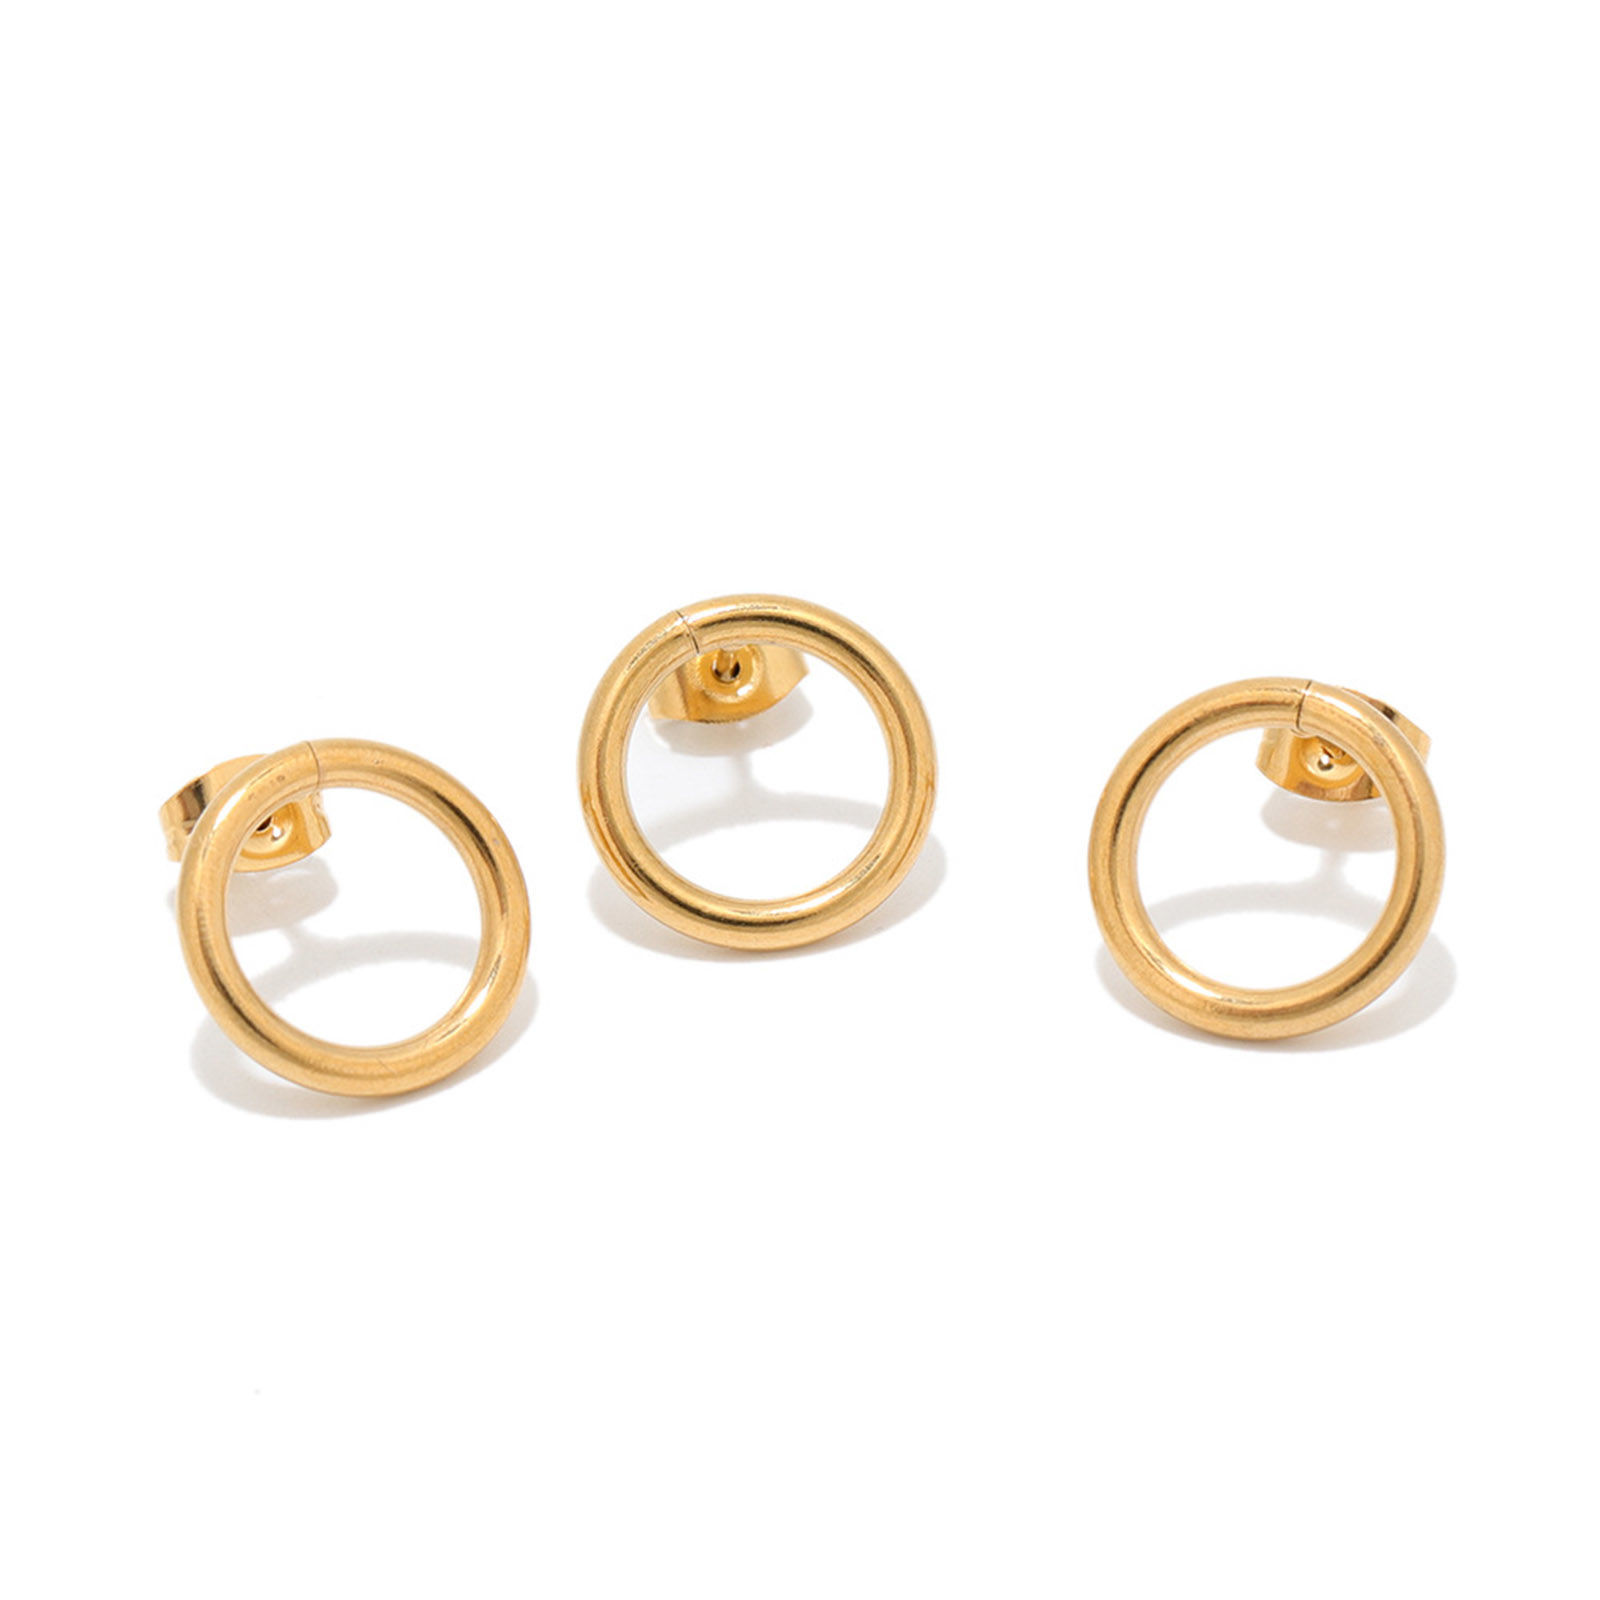 Picture of Stainless Steel Ear Post Stud Earrings Circle Ring 18K Gold Color 12mm Dia., Post/ Wire Size: (20 gauge), 1 Piece